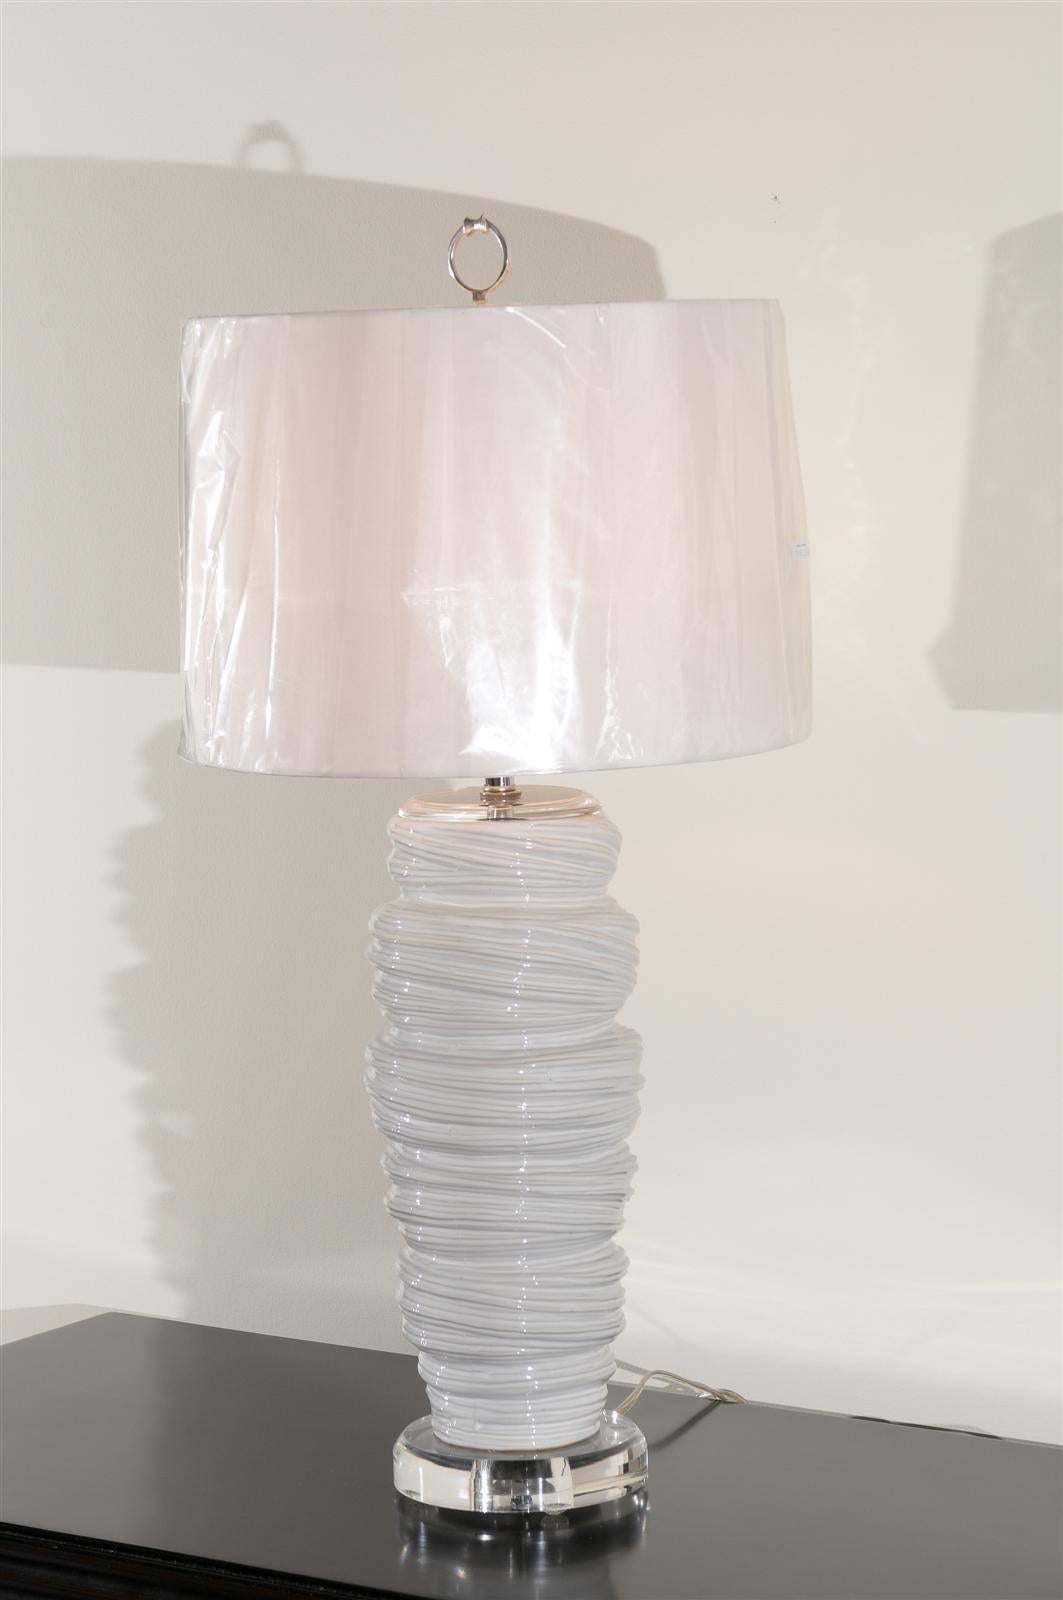 A stunning pair of late 20th century vessels as lamps. Fabulous ceramic form that recalls the look of soft serve ice cream. Beautiful scale and texture. Exceptional jewelry! Excellent restored condition. Wired using clear cord; new nickel three-way